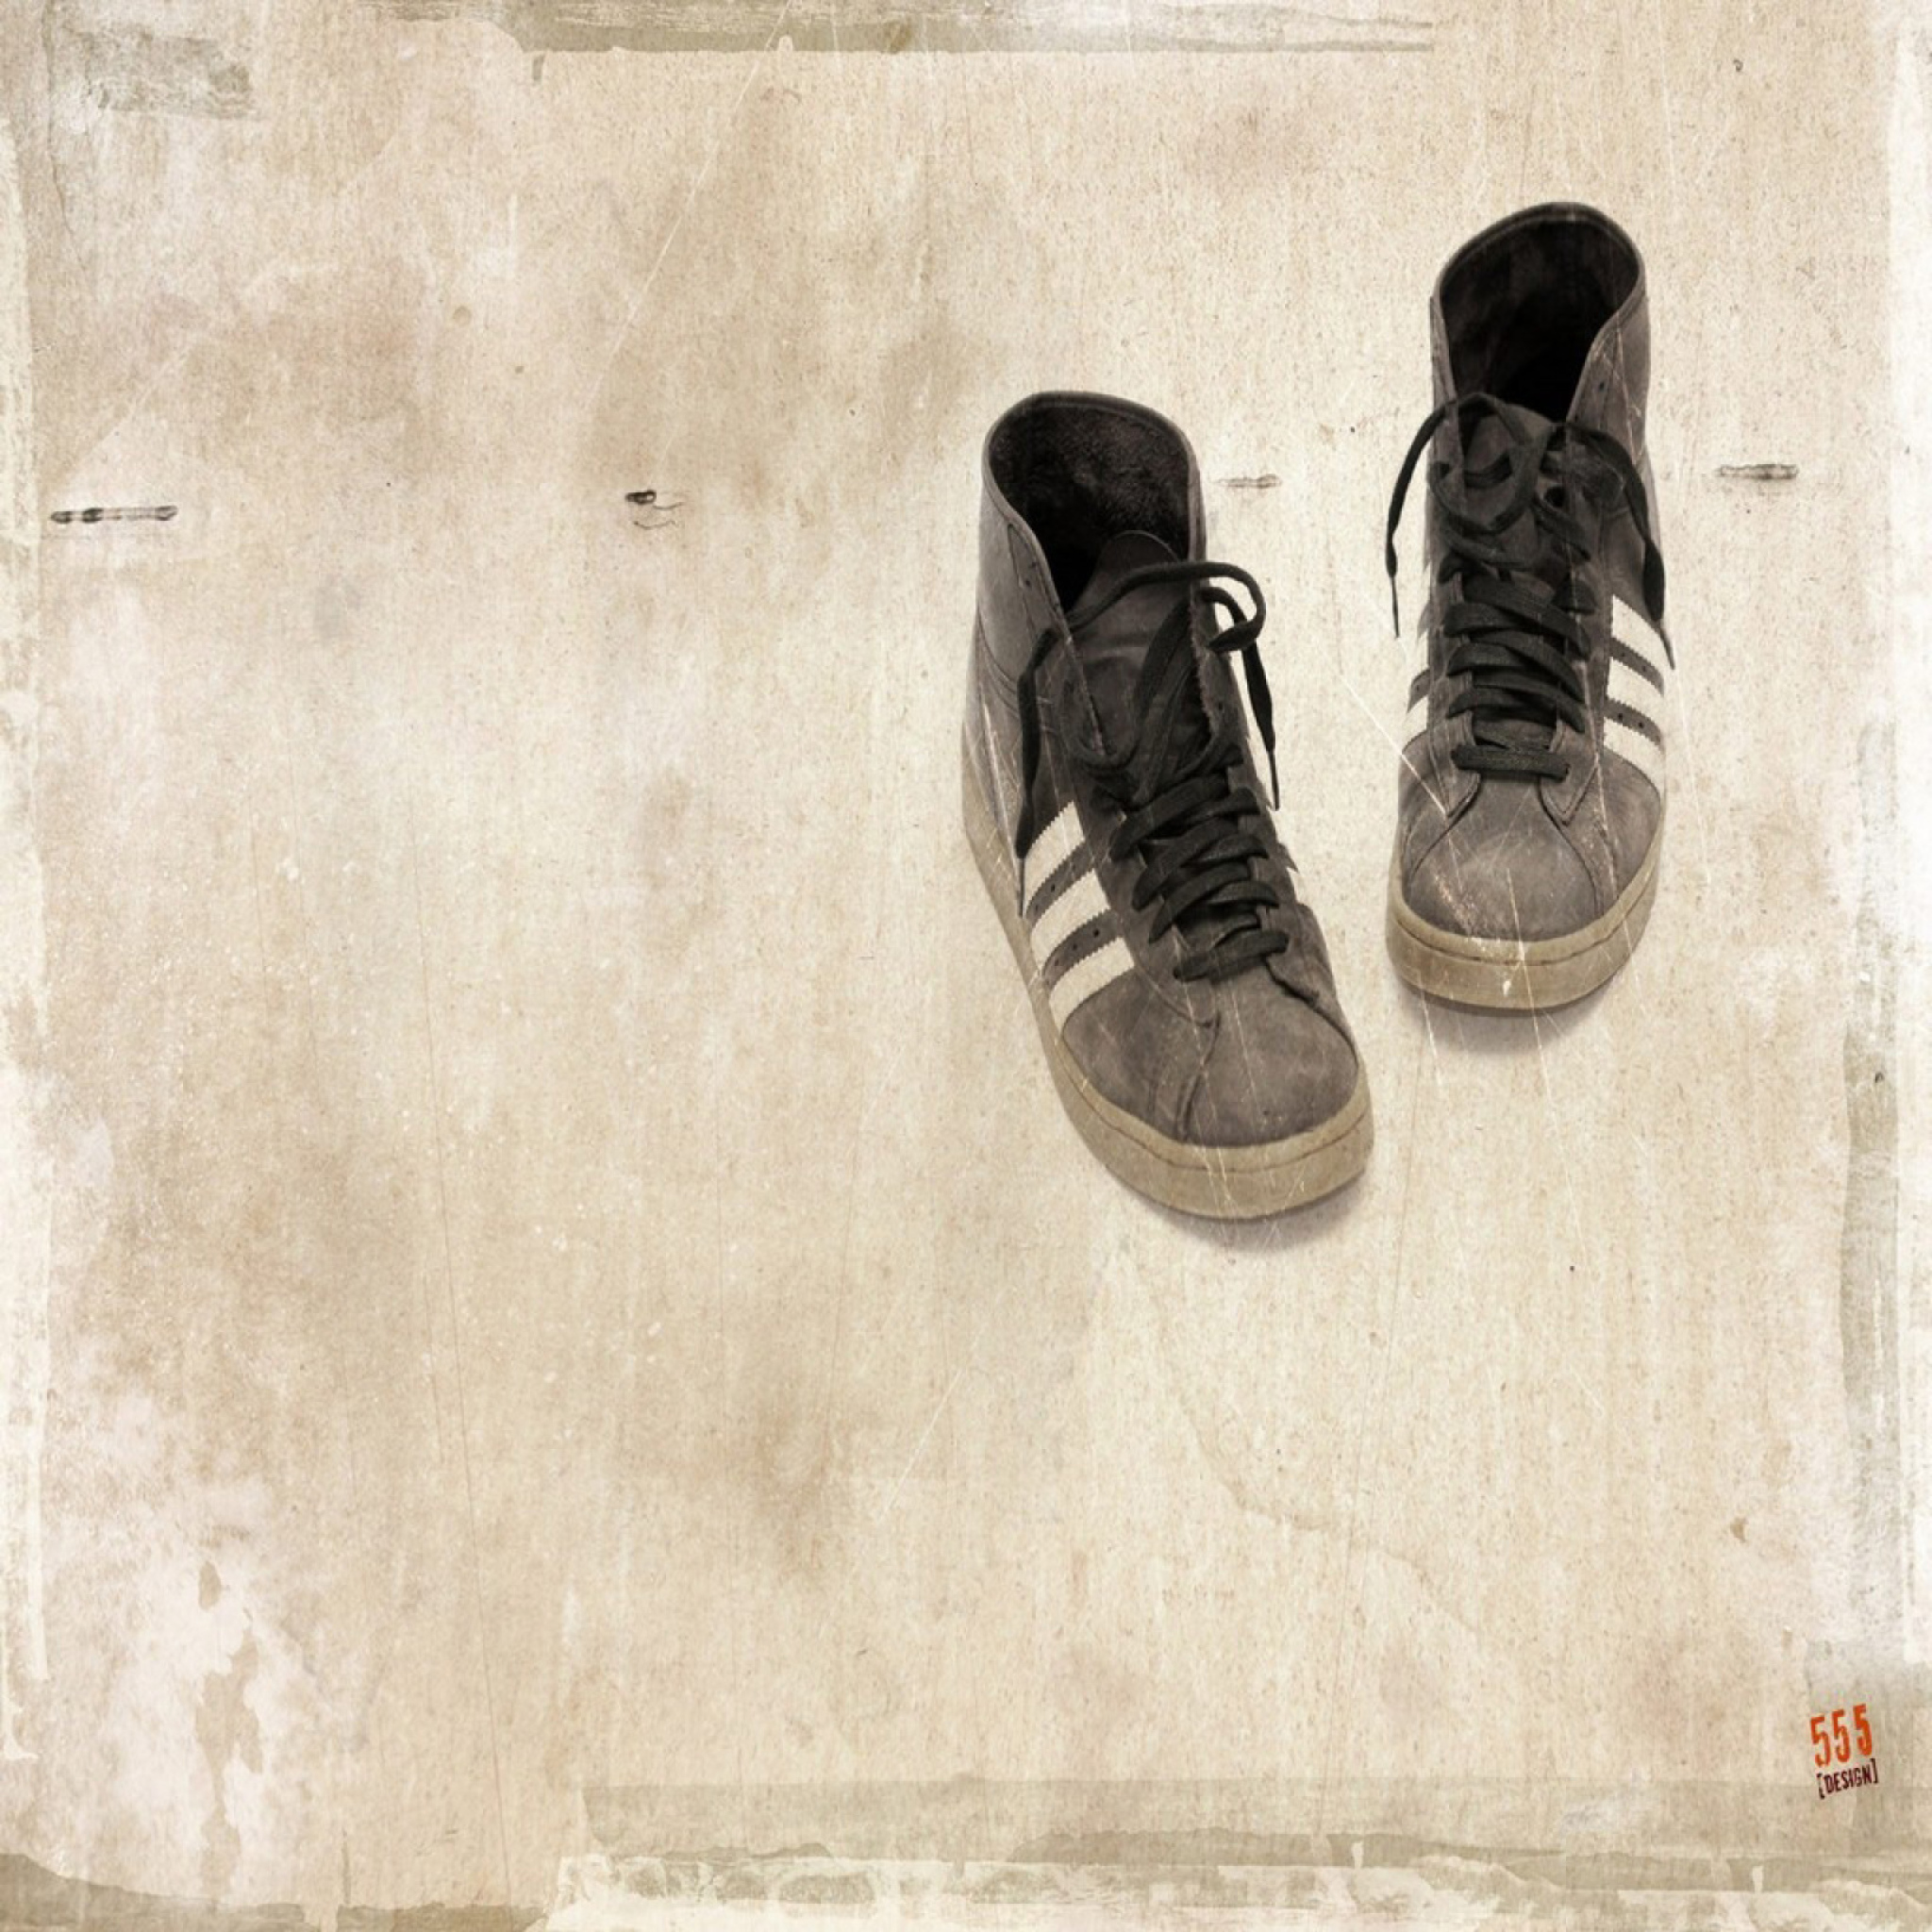 Grungy Sneakers wallpaper 2048x2048